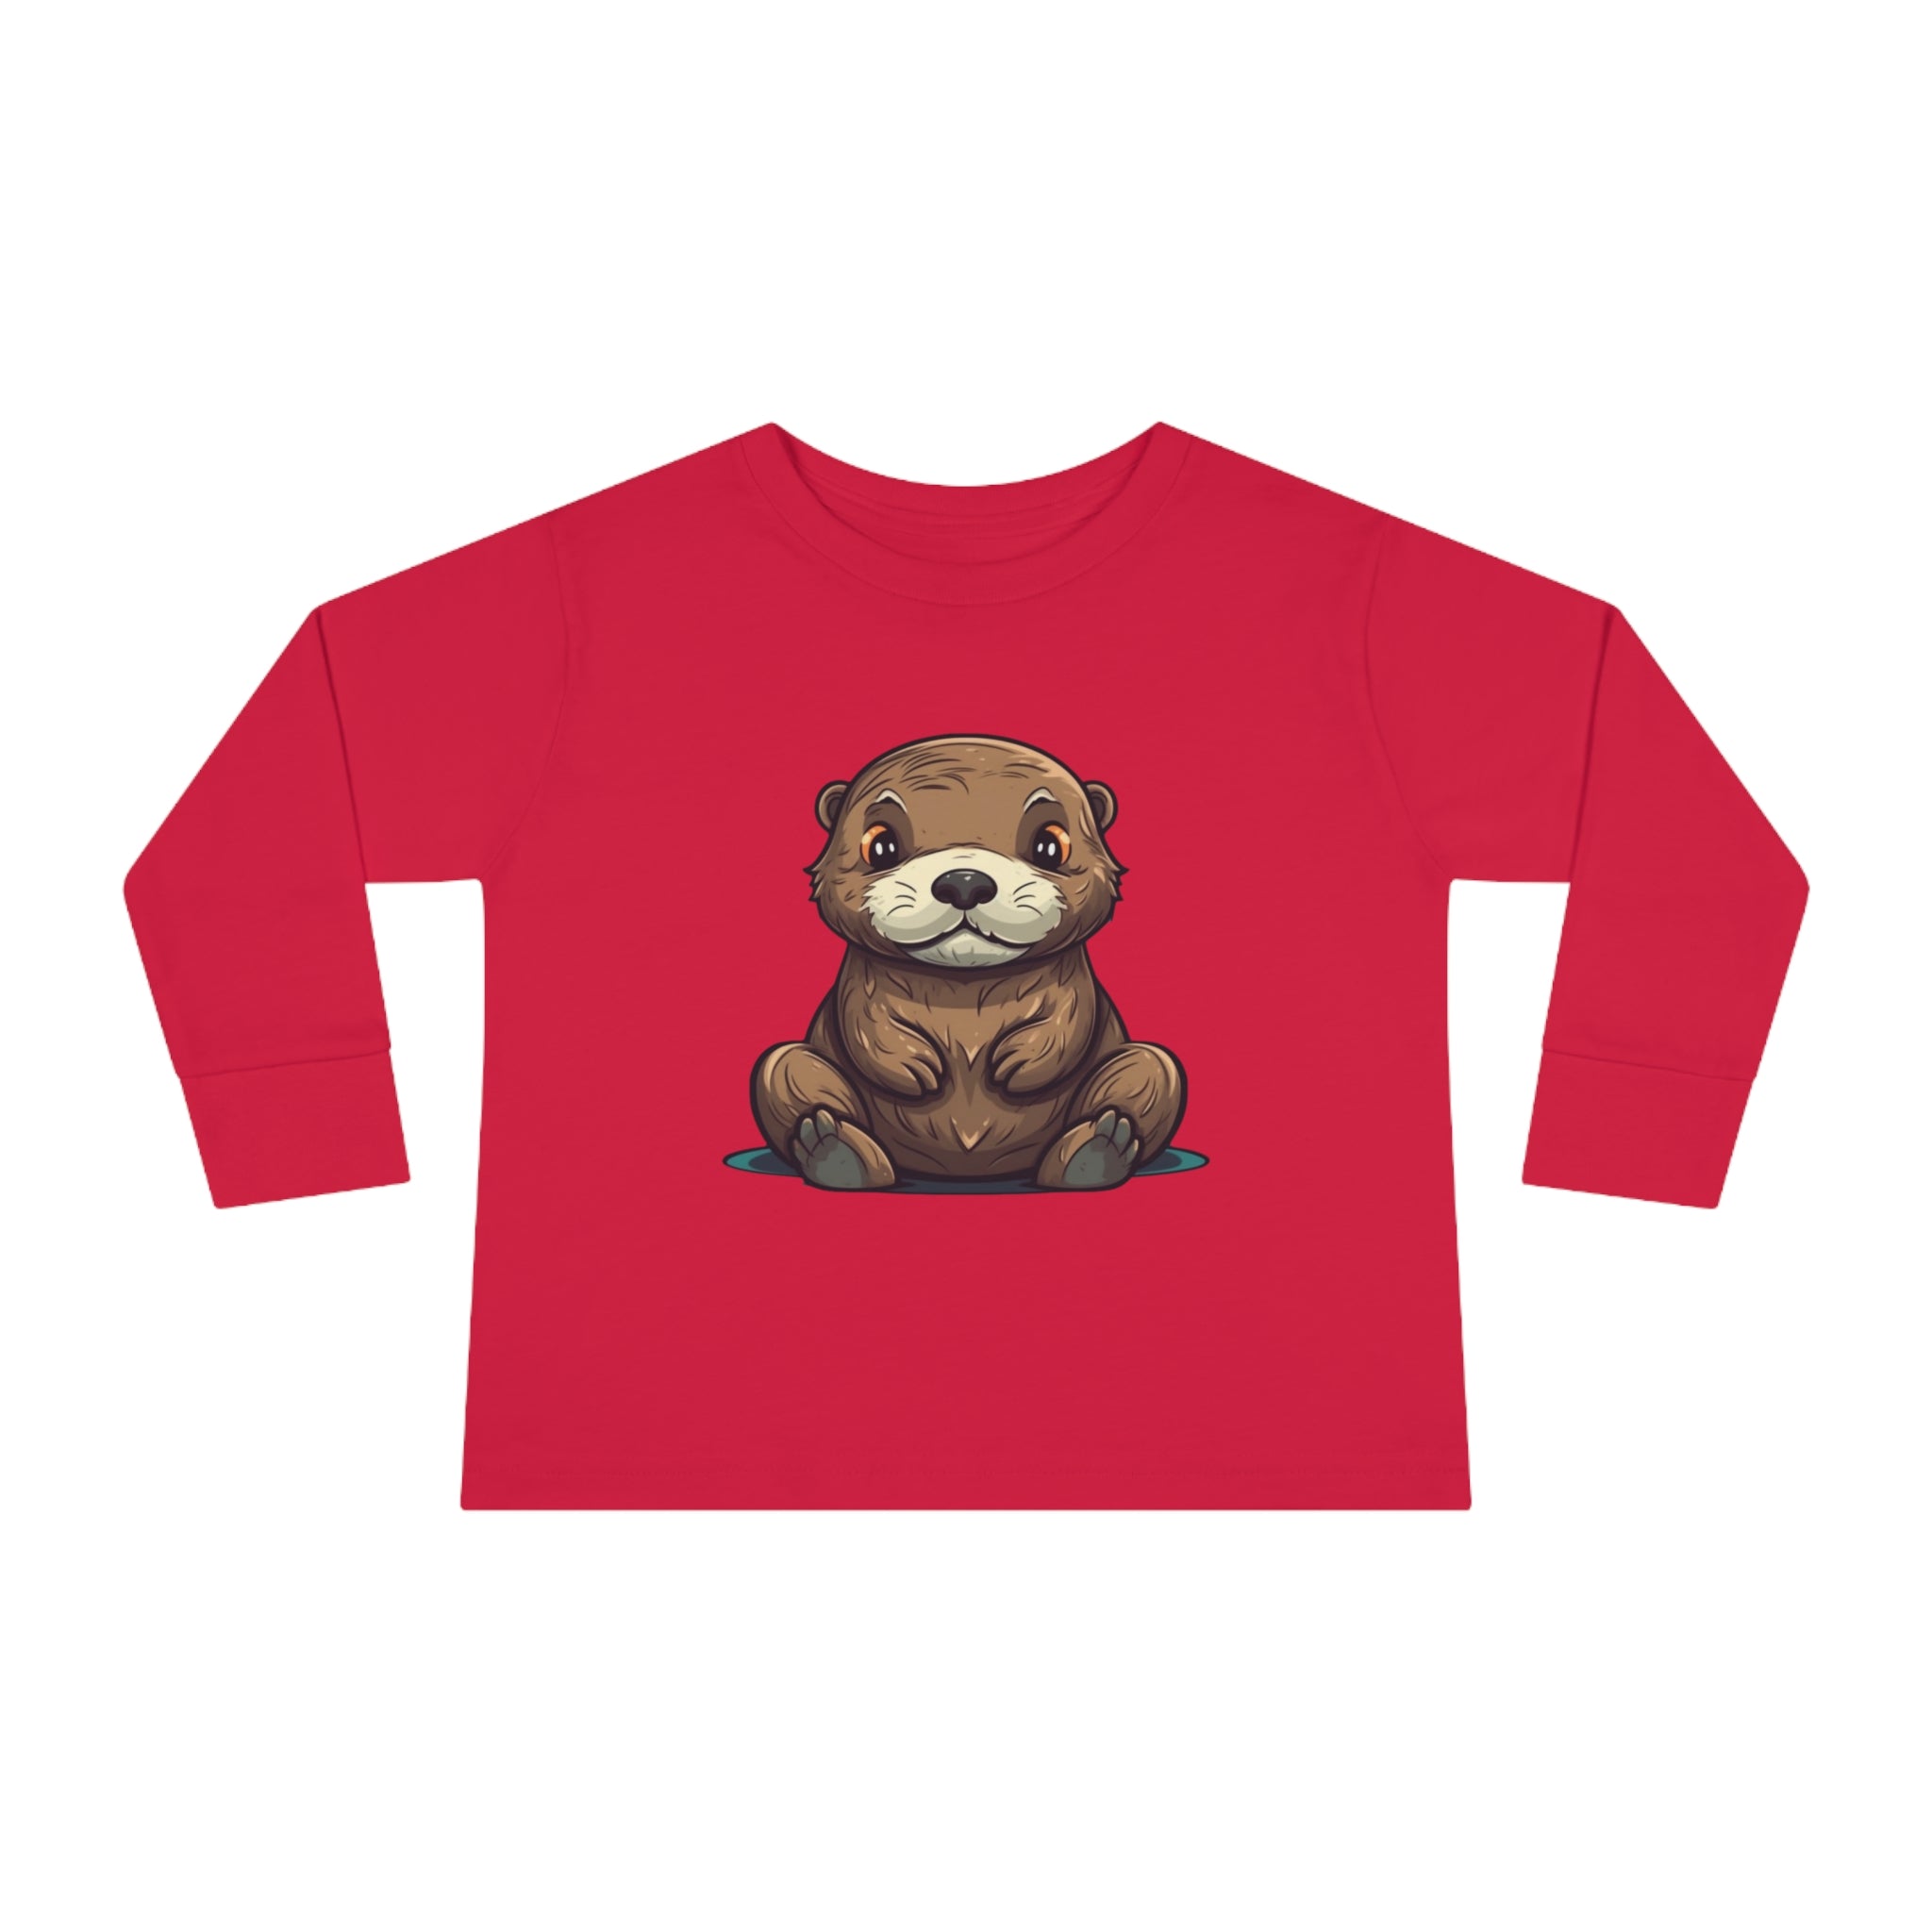 Toddler Long Sleeve Tee - Sea Otter Pup